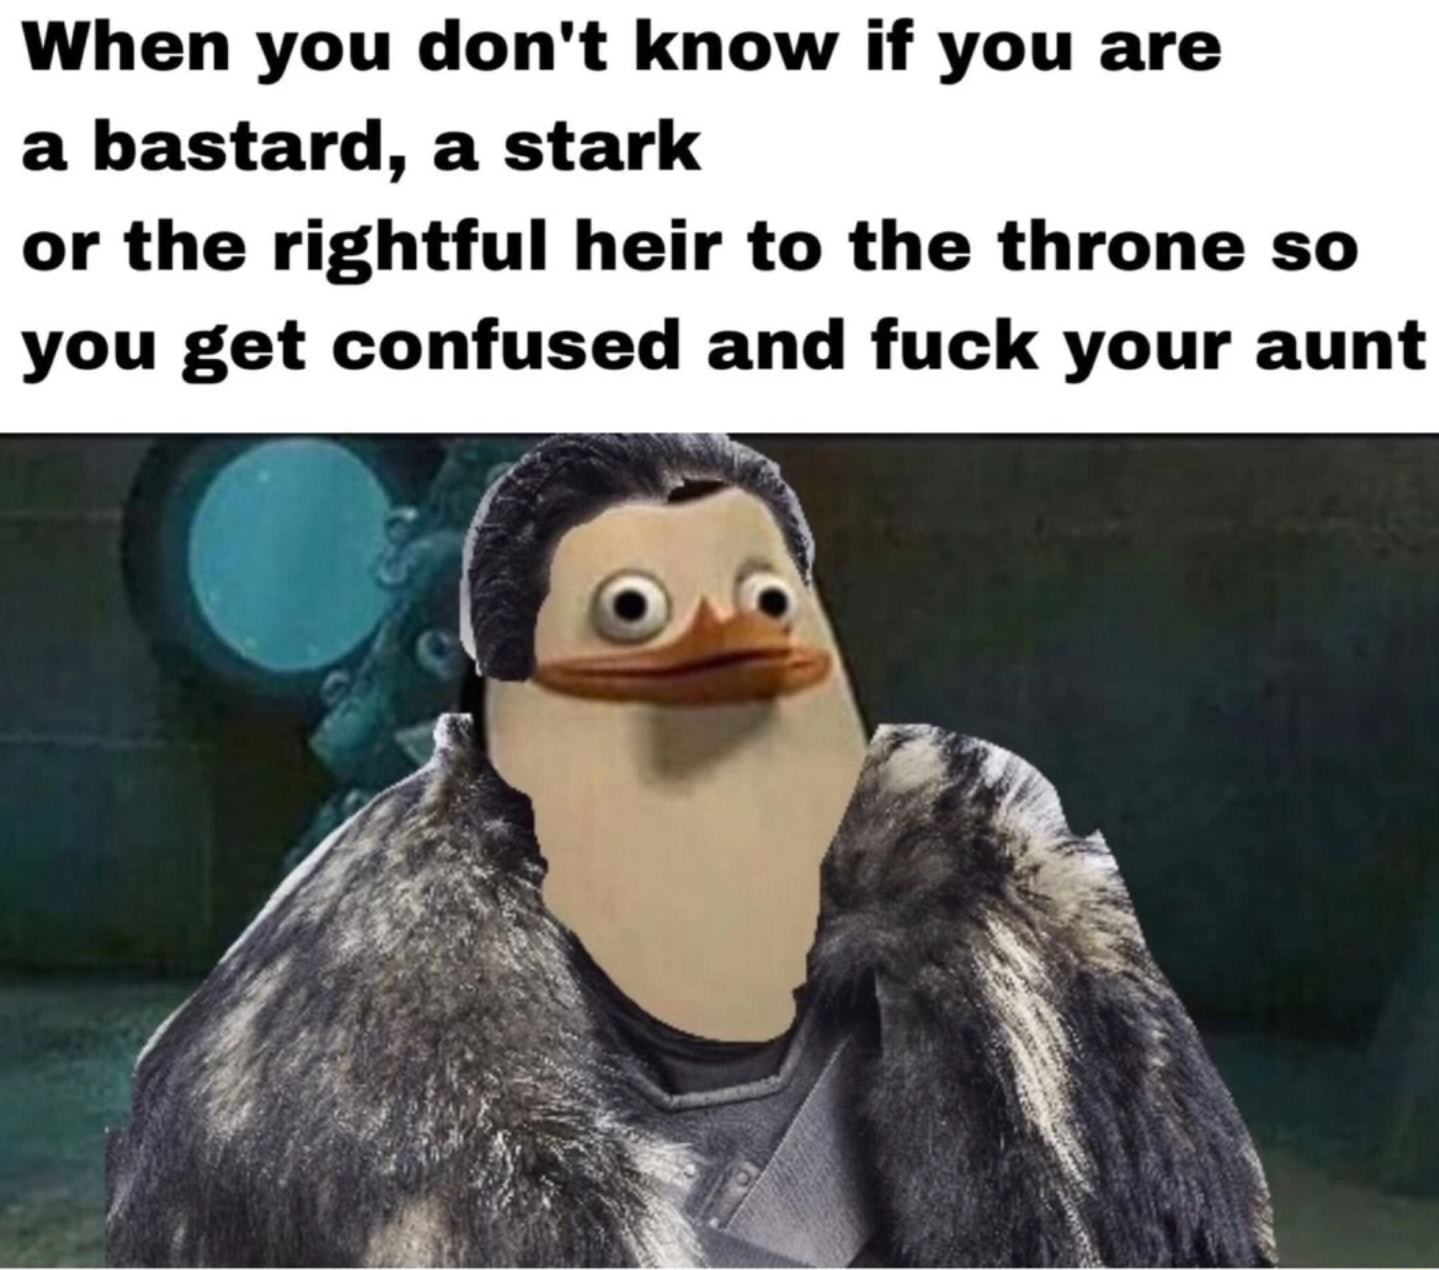 memes - jon snow get confused meme - When you don't know if you are a bastard, a stark or the rightful heir to the throne so you get confused and fuck your aunt